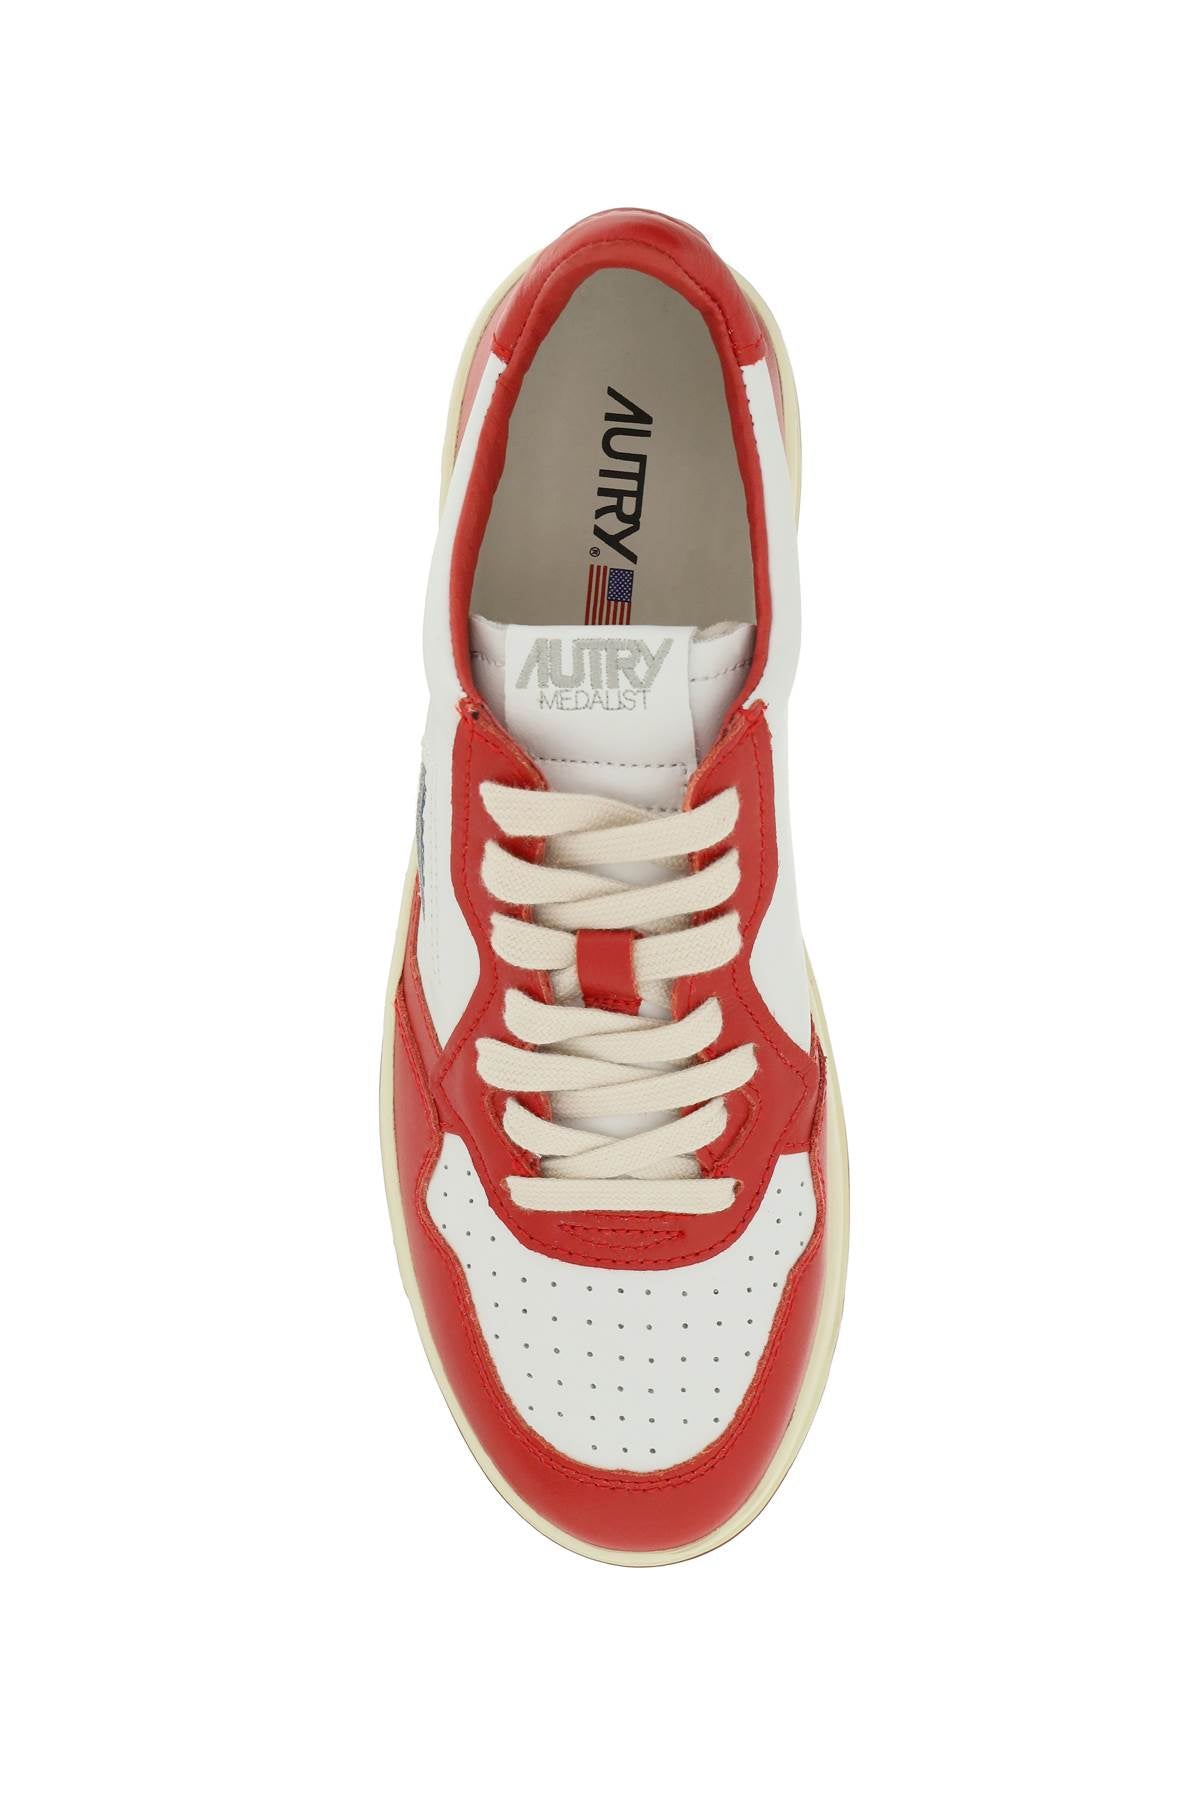 AUTRY leather medalist low sneakers AULMWB02WHTRD